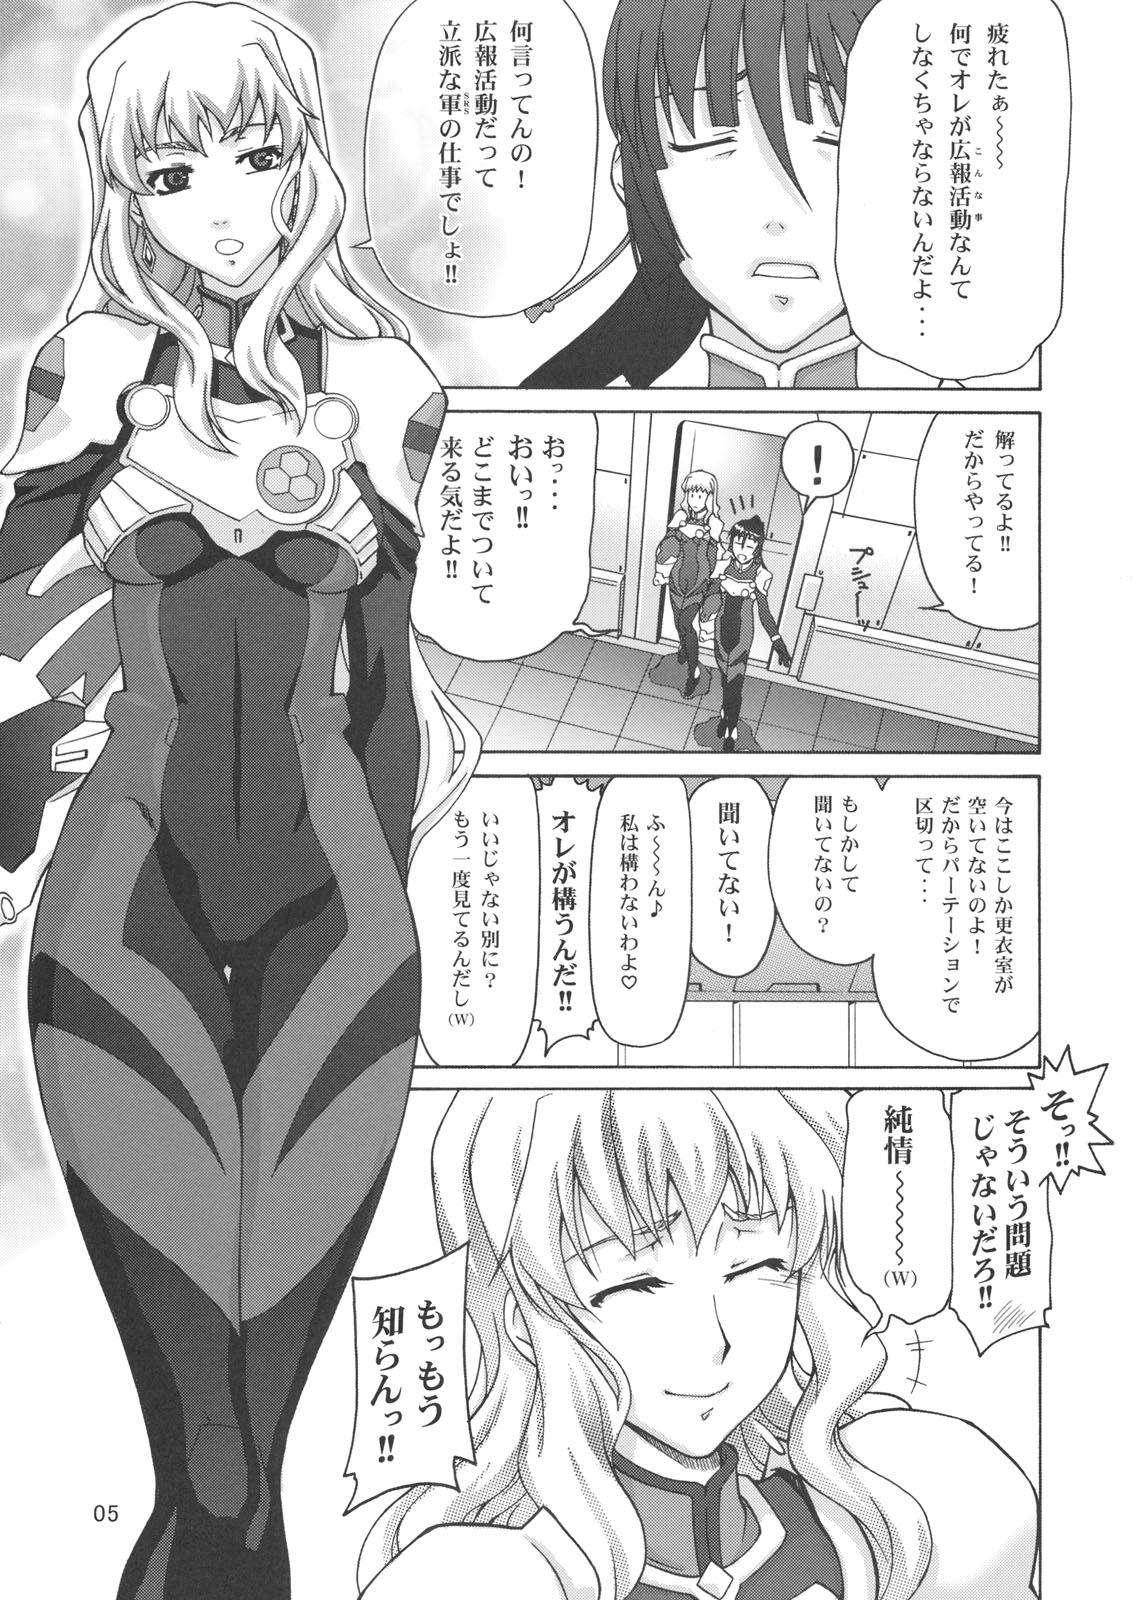 Passion TSUNDERE Frontier - Macross frontier Ex Girlfriend - Page 4